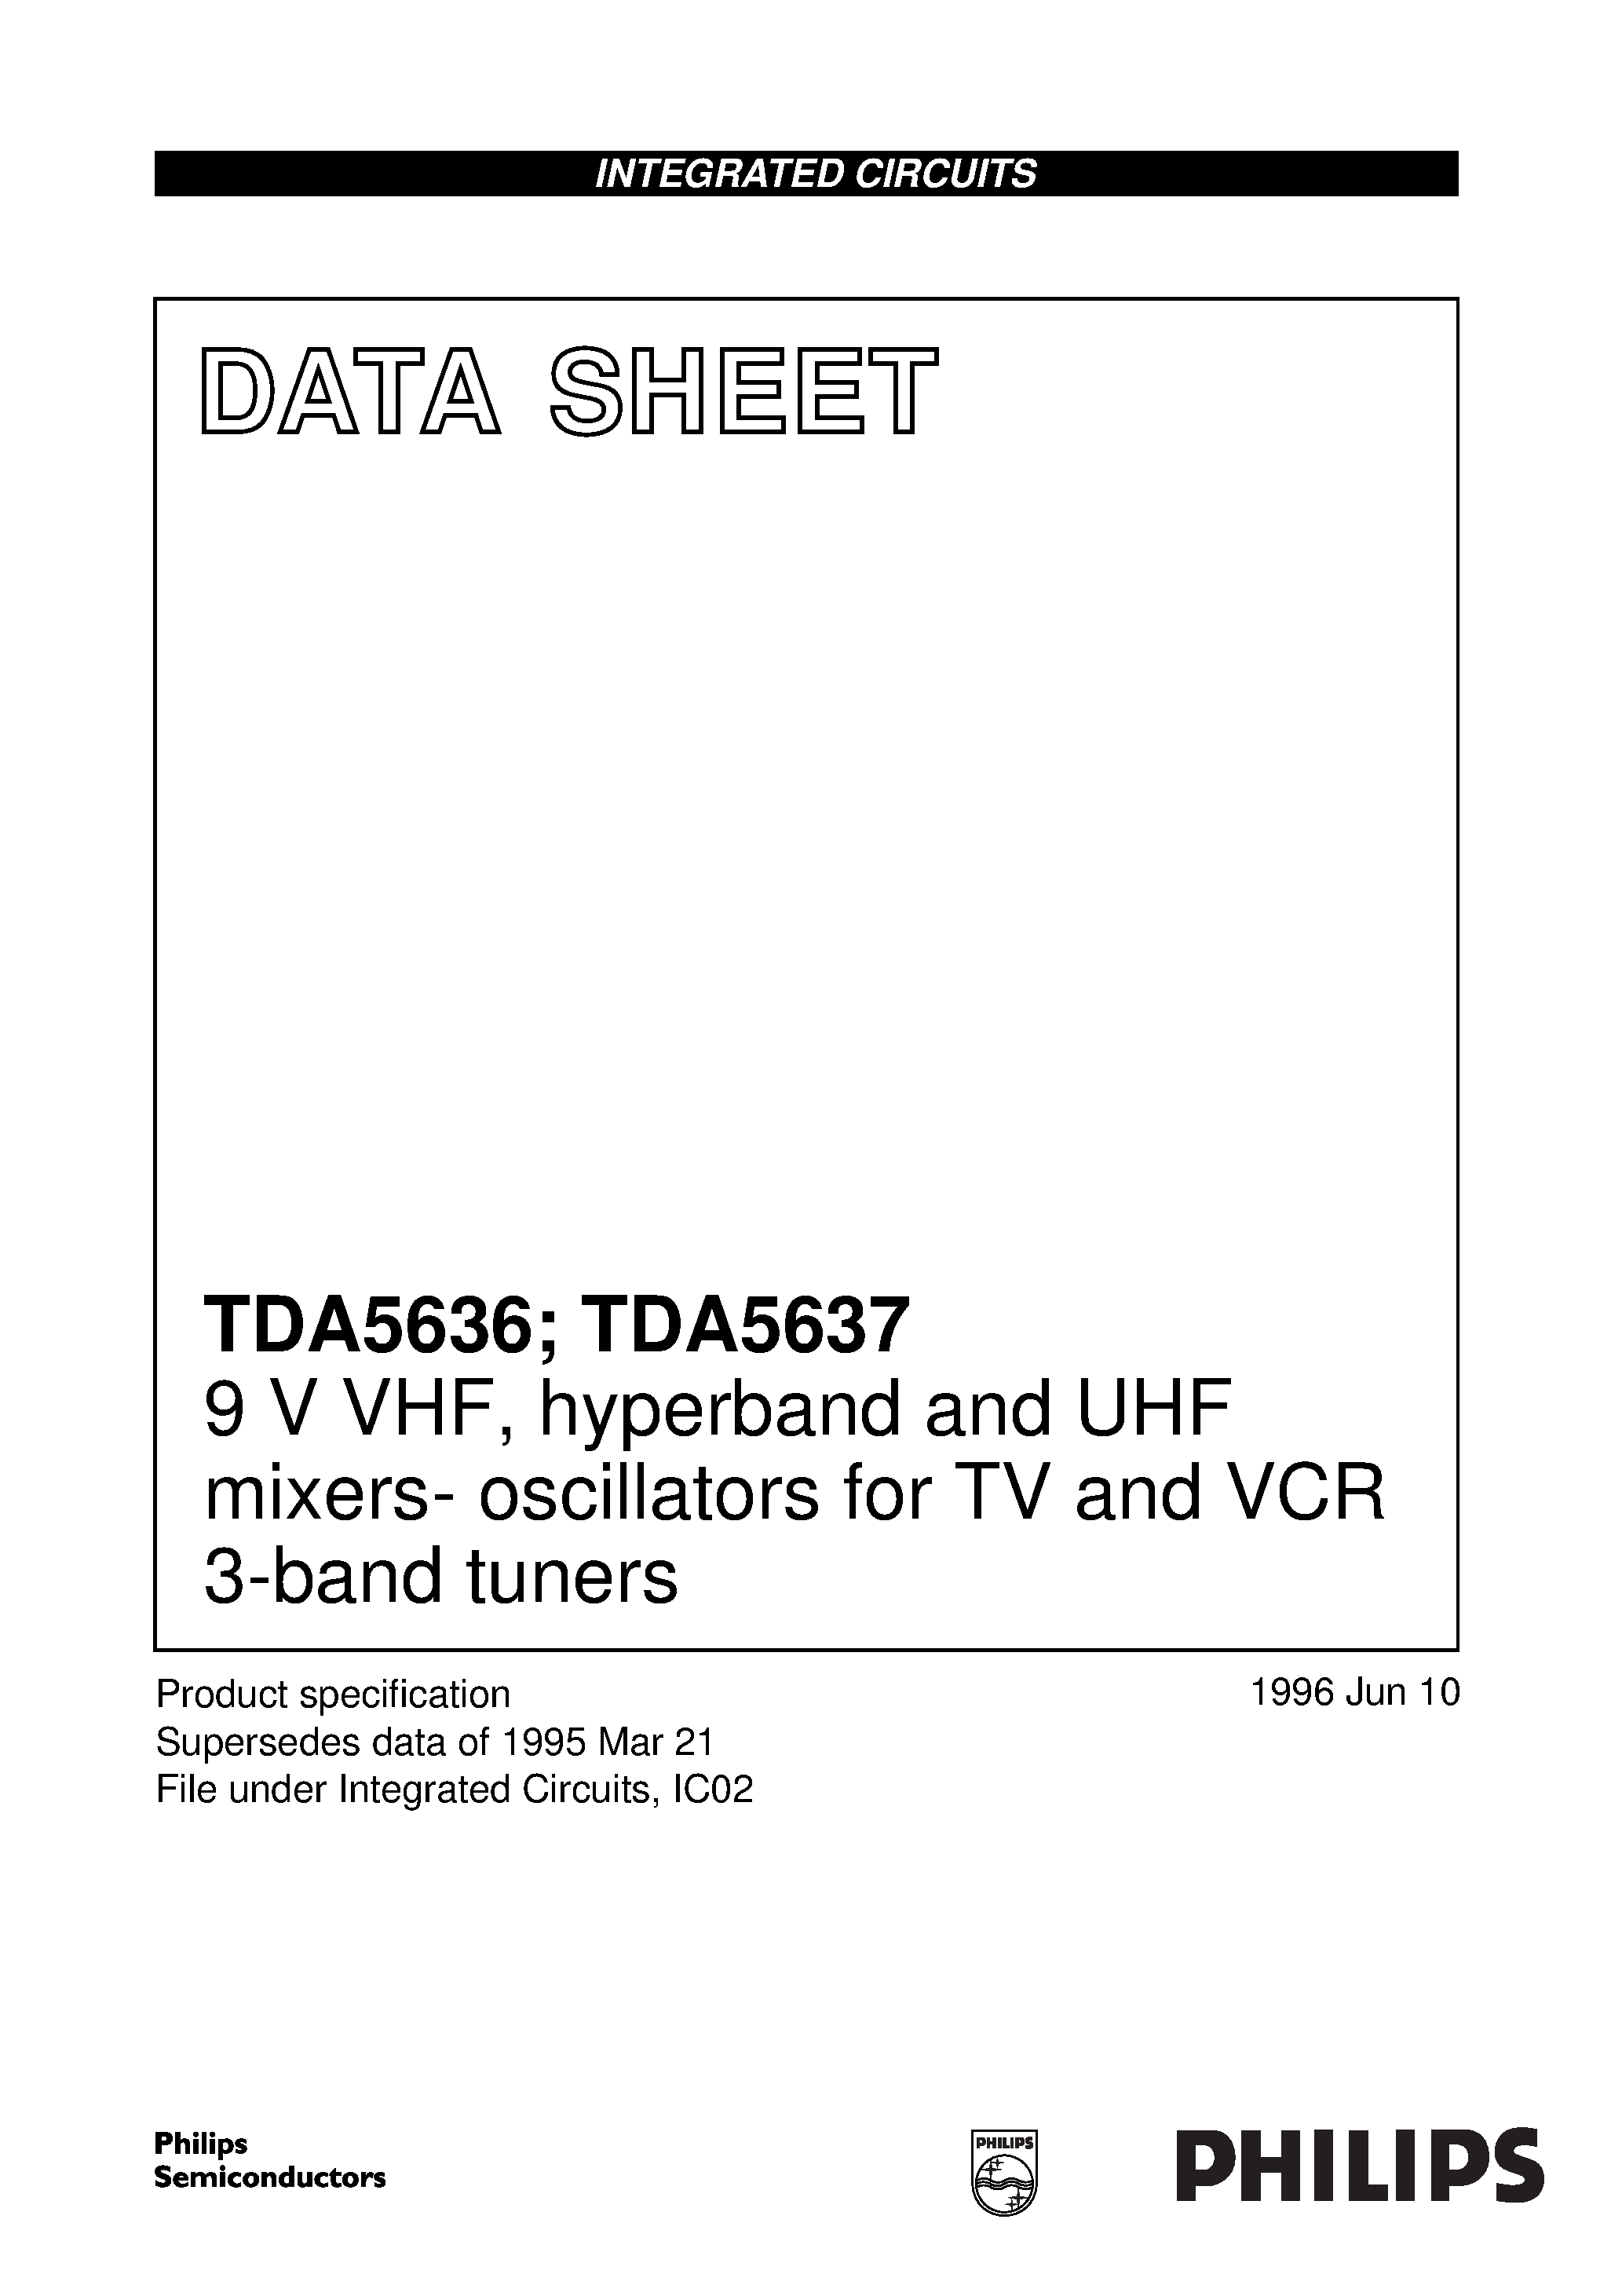 Даташит TDA5636T - 9 V VHF/ hyperband and UHF mixers- oscillators for TV and VCR 3-band tuners страница 1